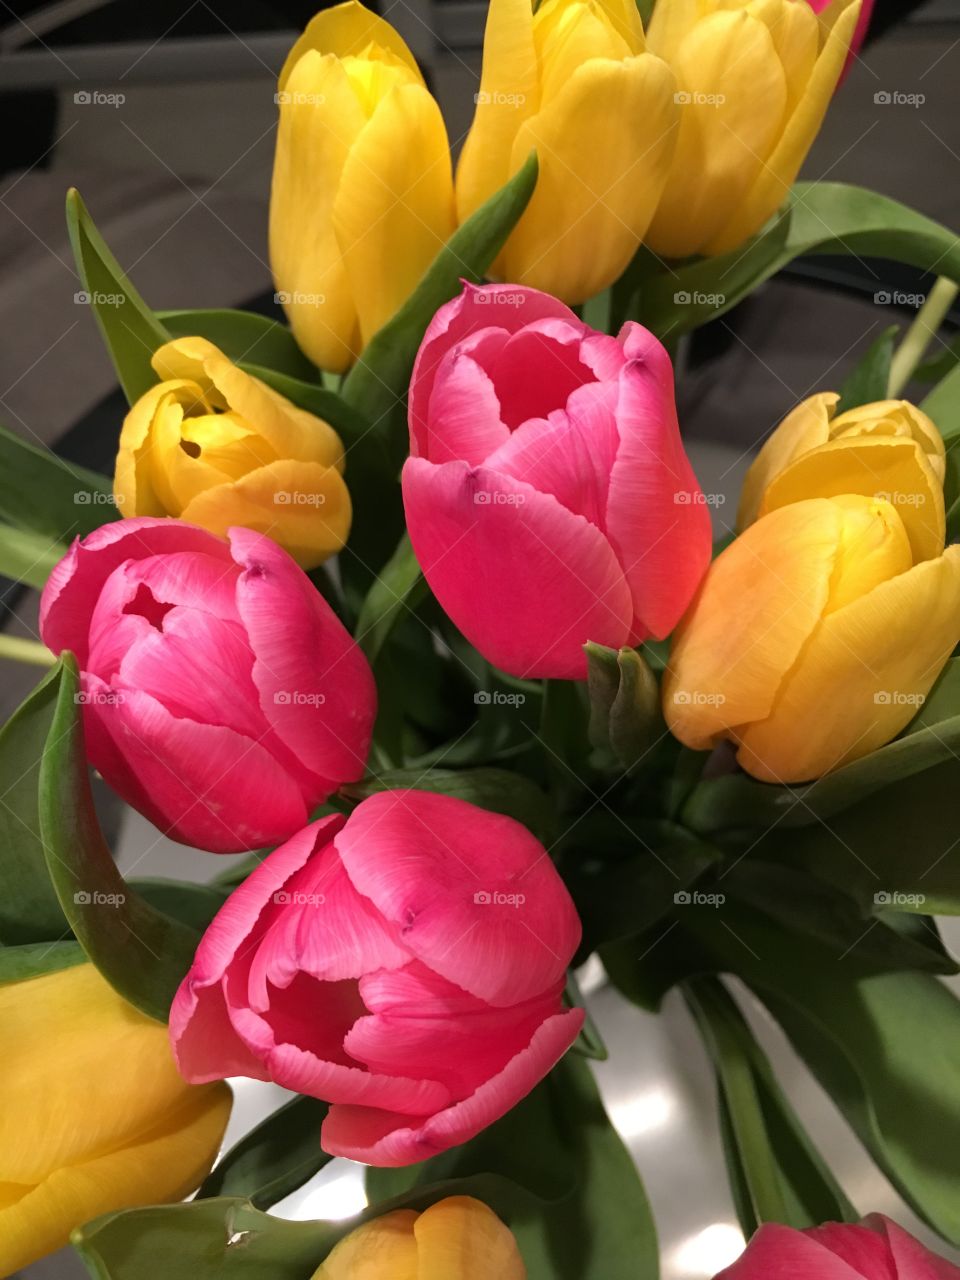 Elevated view of tulips flower